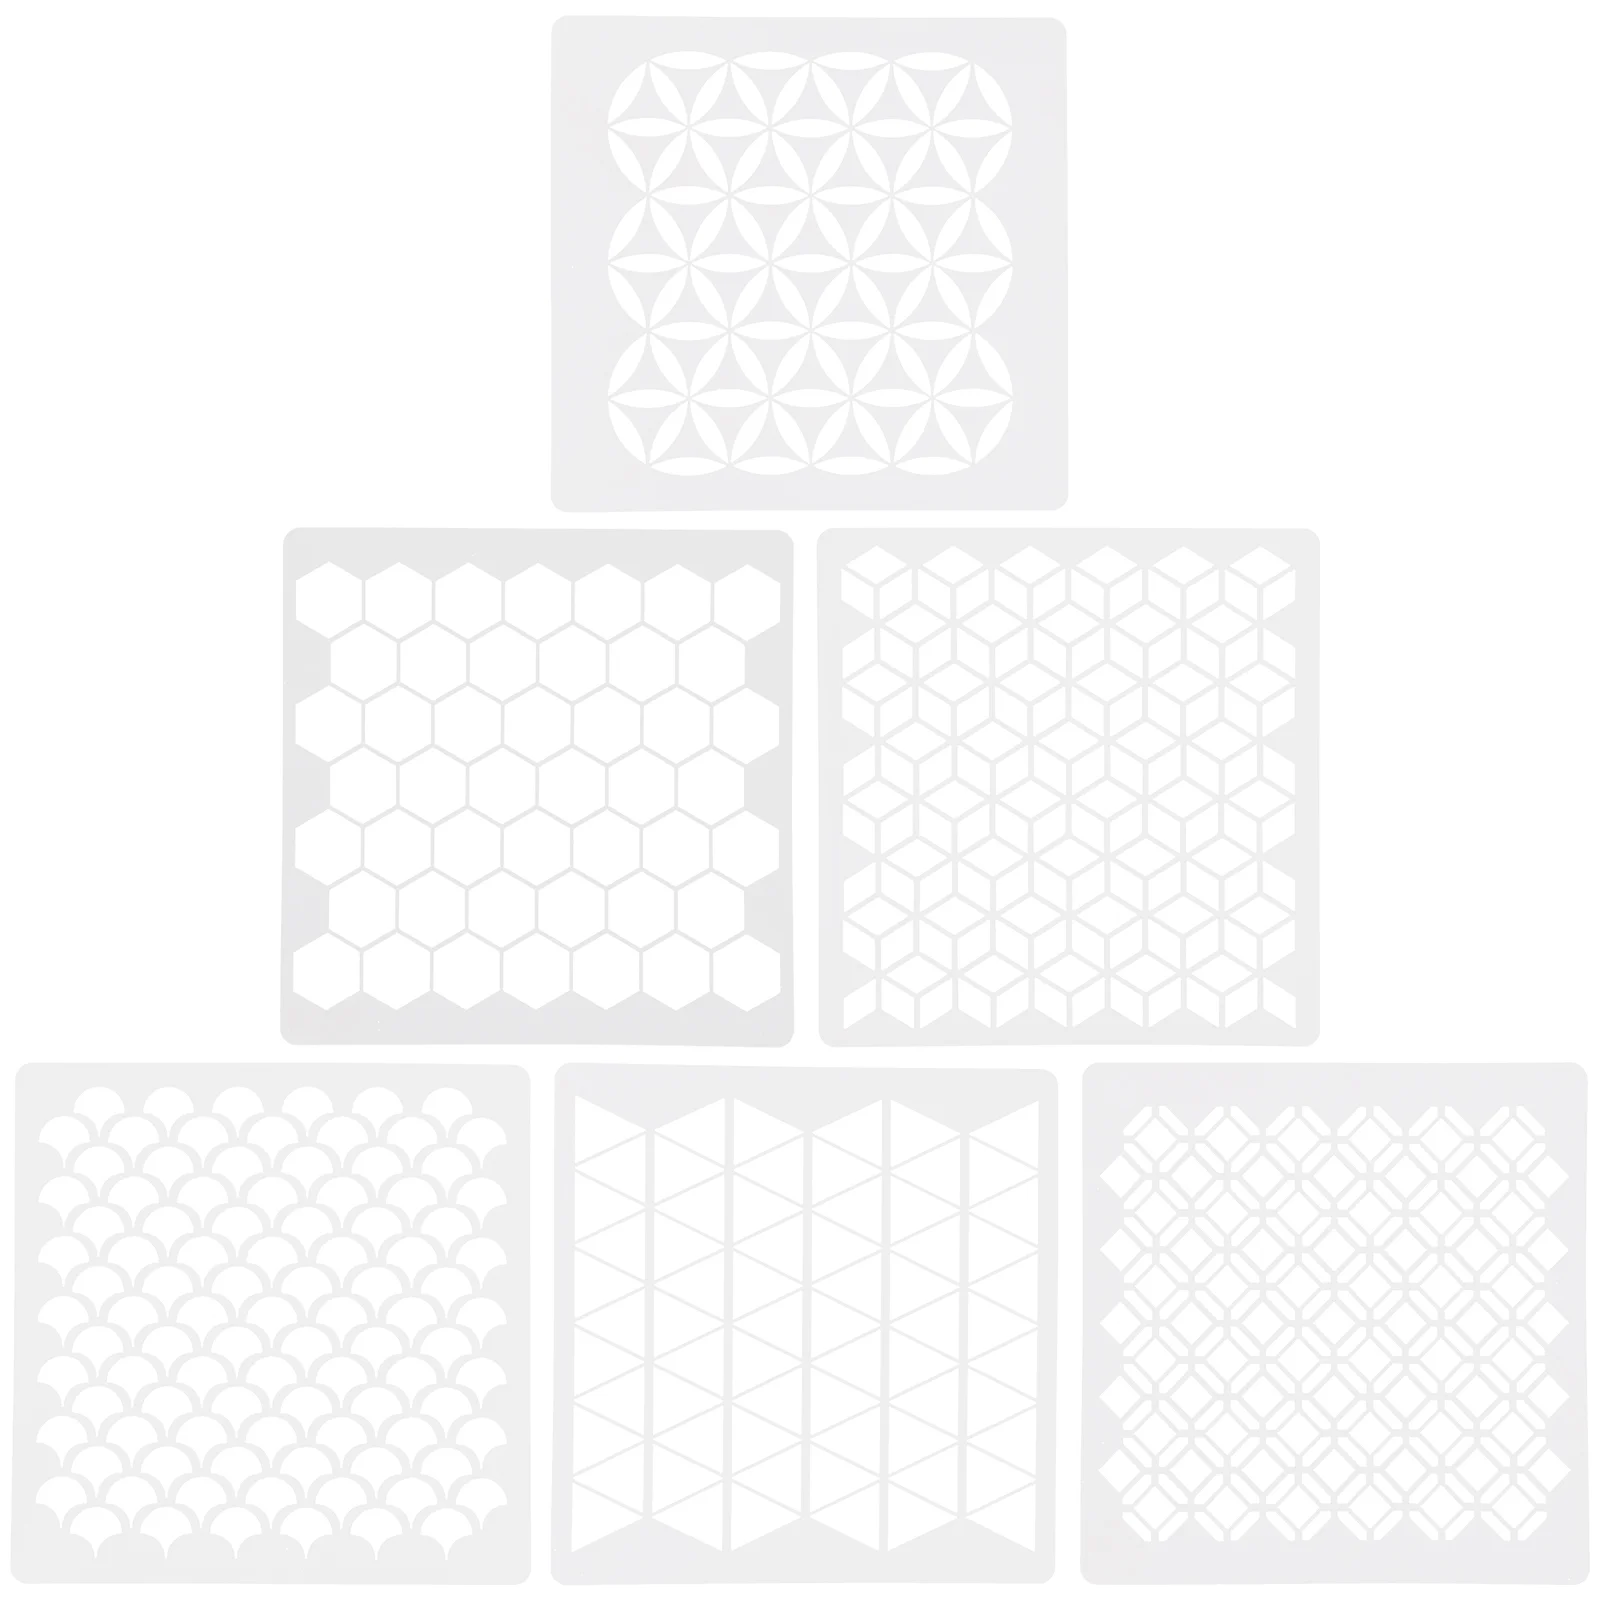 

6Pcs Geometric Honeycomb Stencils Reusable Painting Templates Journaling Stencil Set for Painting on Walls Canvas Wood